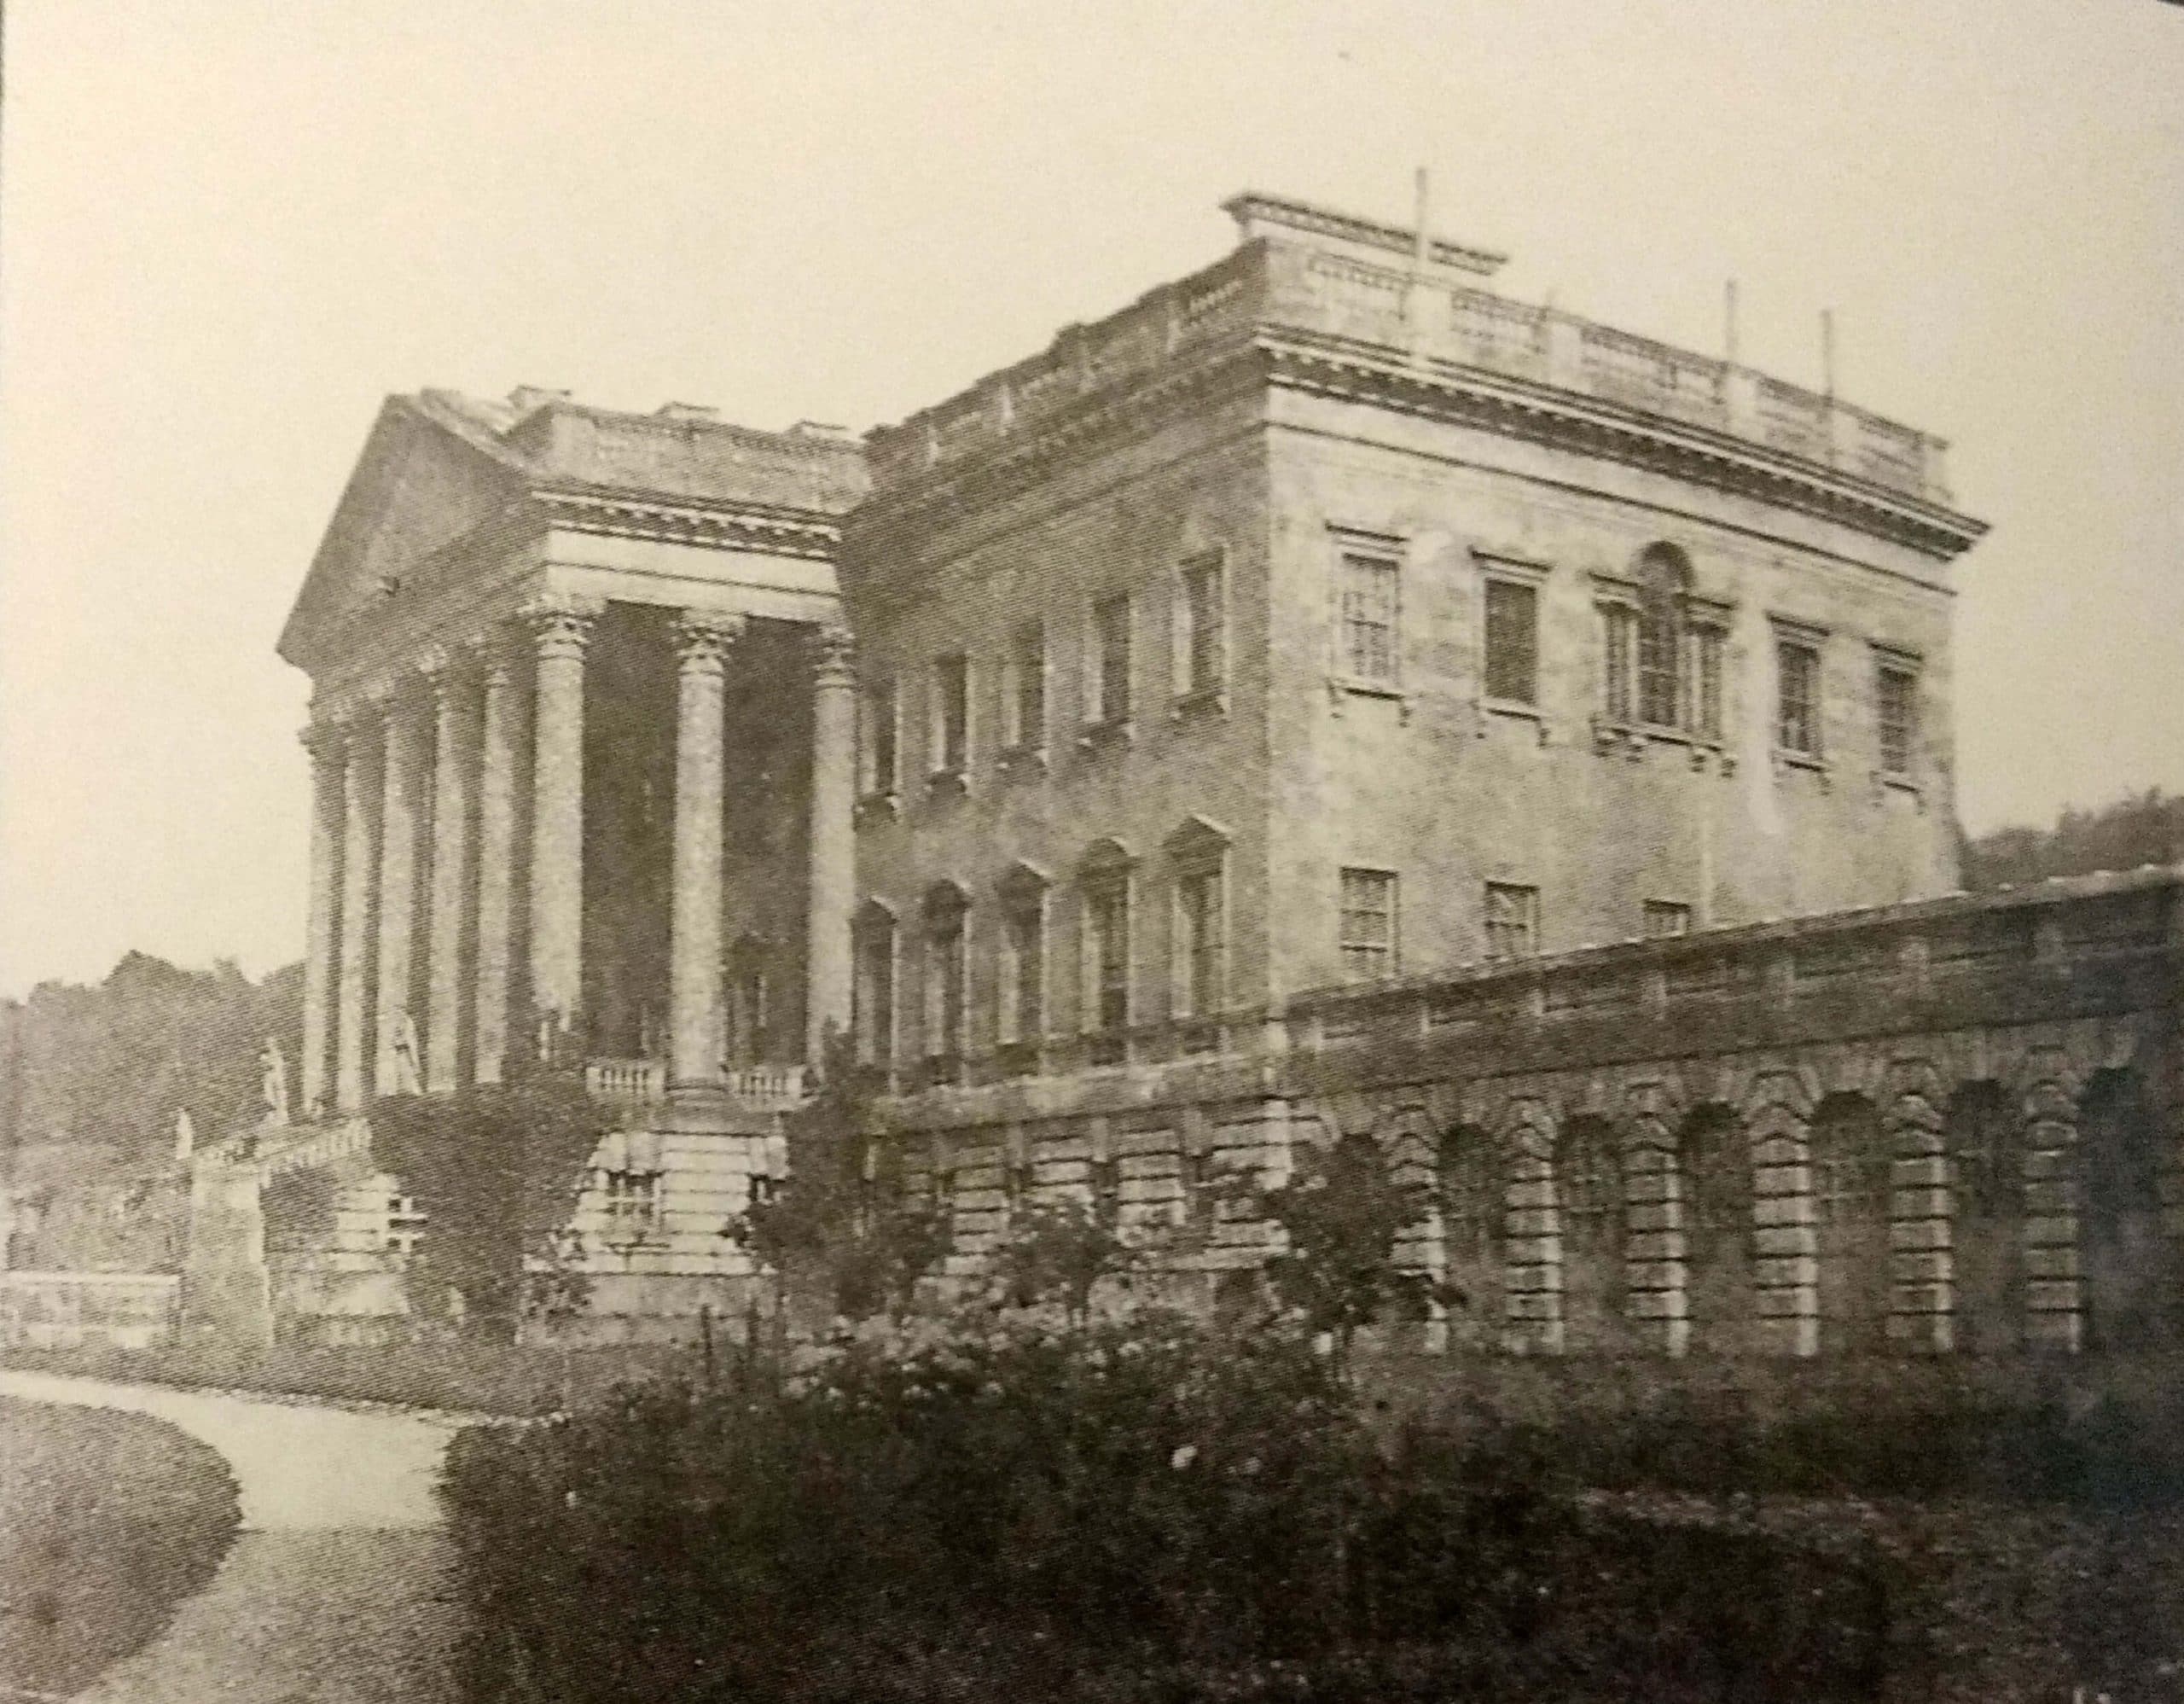 prior-park-mansion-and-portico-in-about-1855-rev-francis-lockey-1796-1869